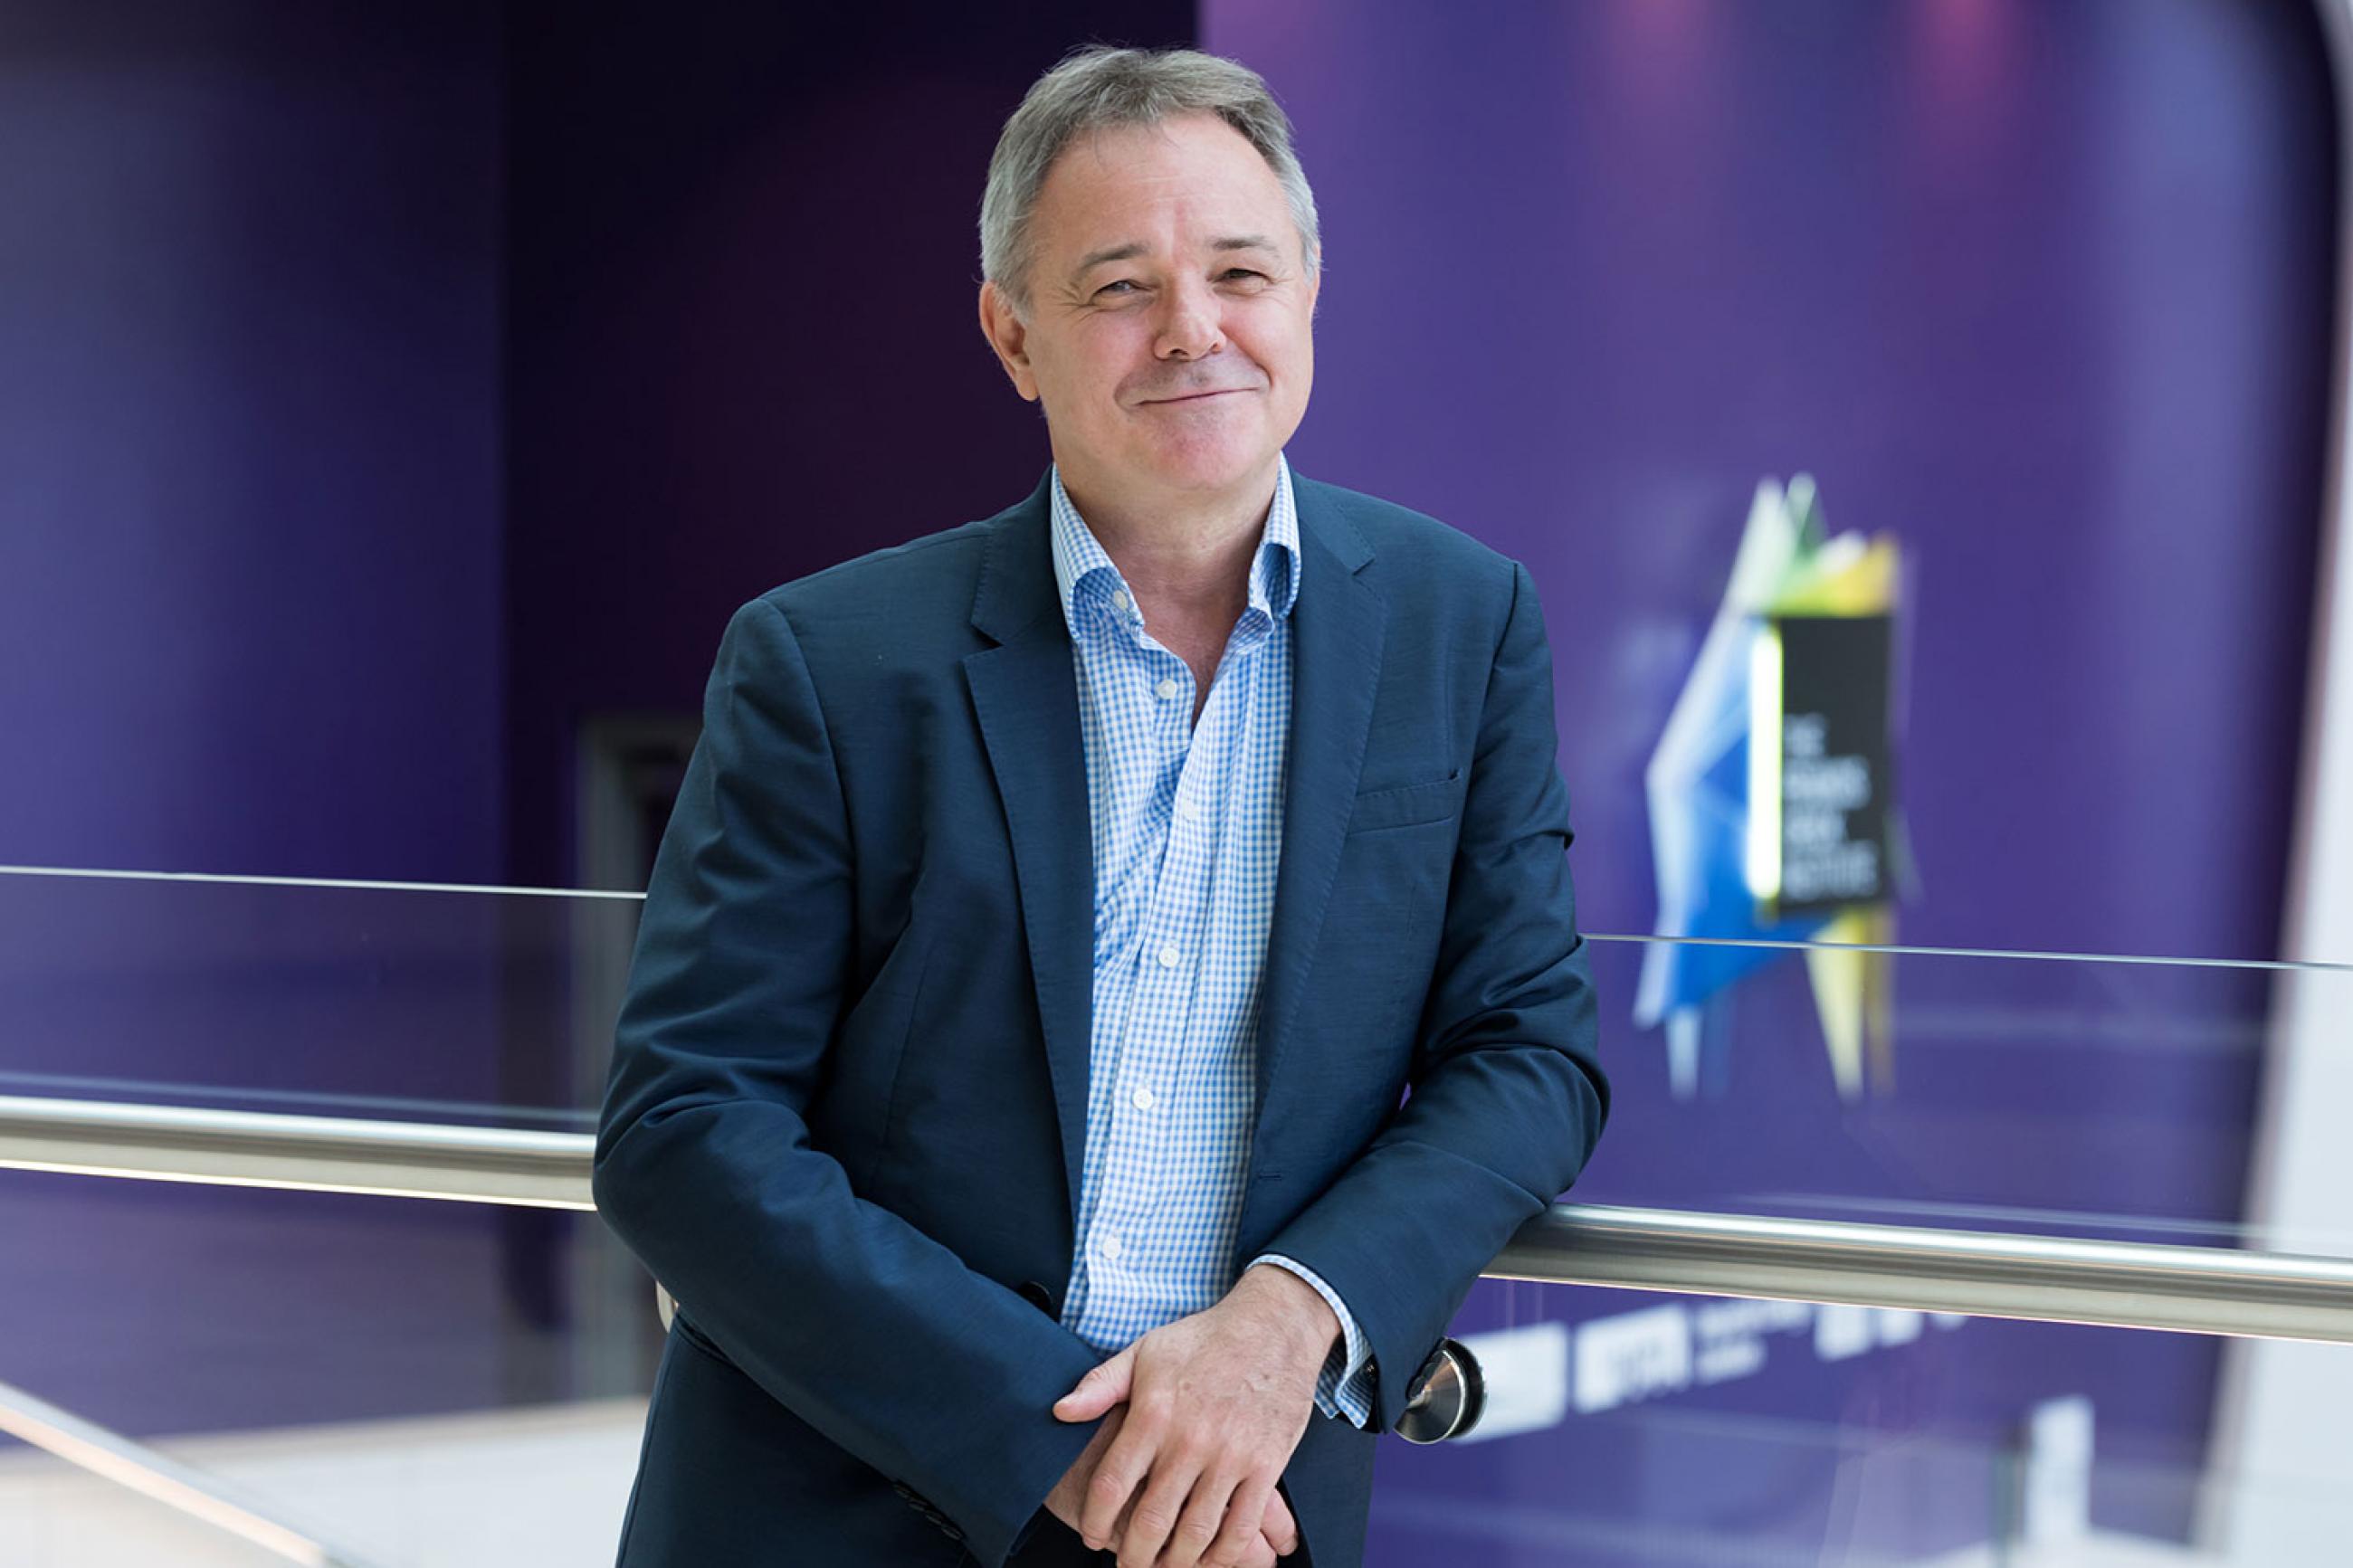 Jeremy Farrar, Director of the Wellcome Trust. The picture shows Farrar wearing a blue shirt and blazer, smiling as he leans on sleek railing and standing out against a highly bokeh background. FRANCIS CRICK INSTITUTE/Dave Guttridge